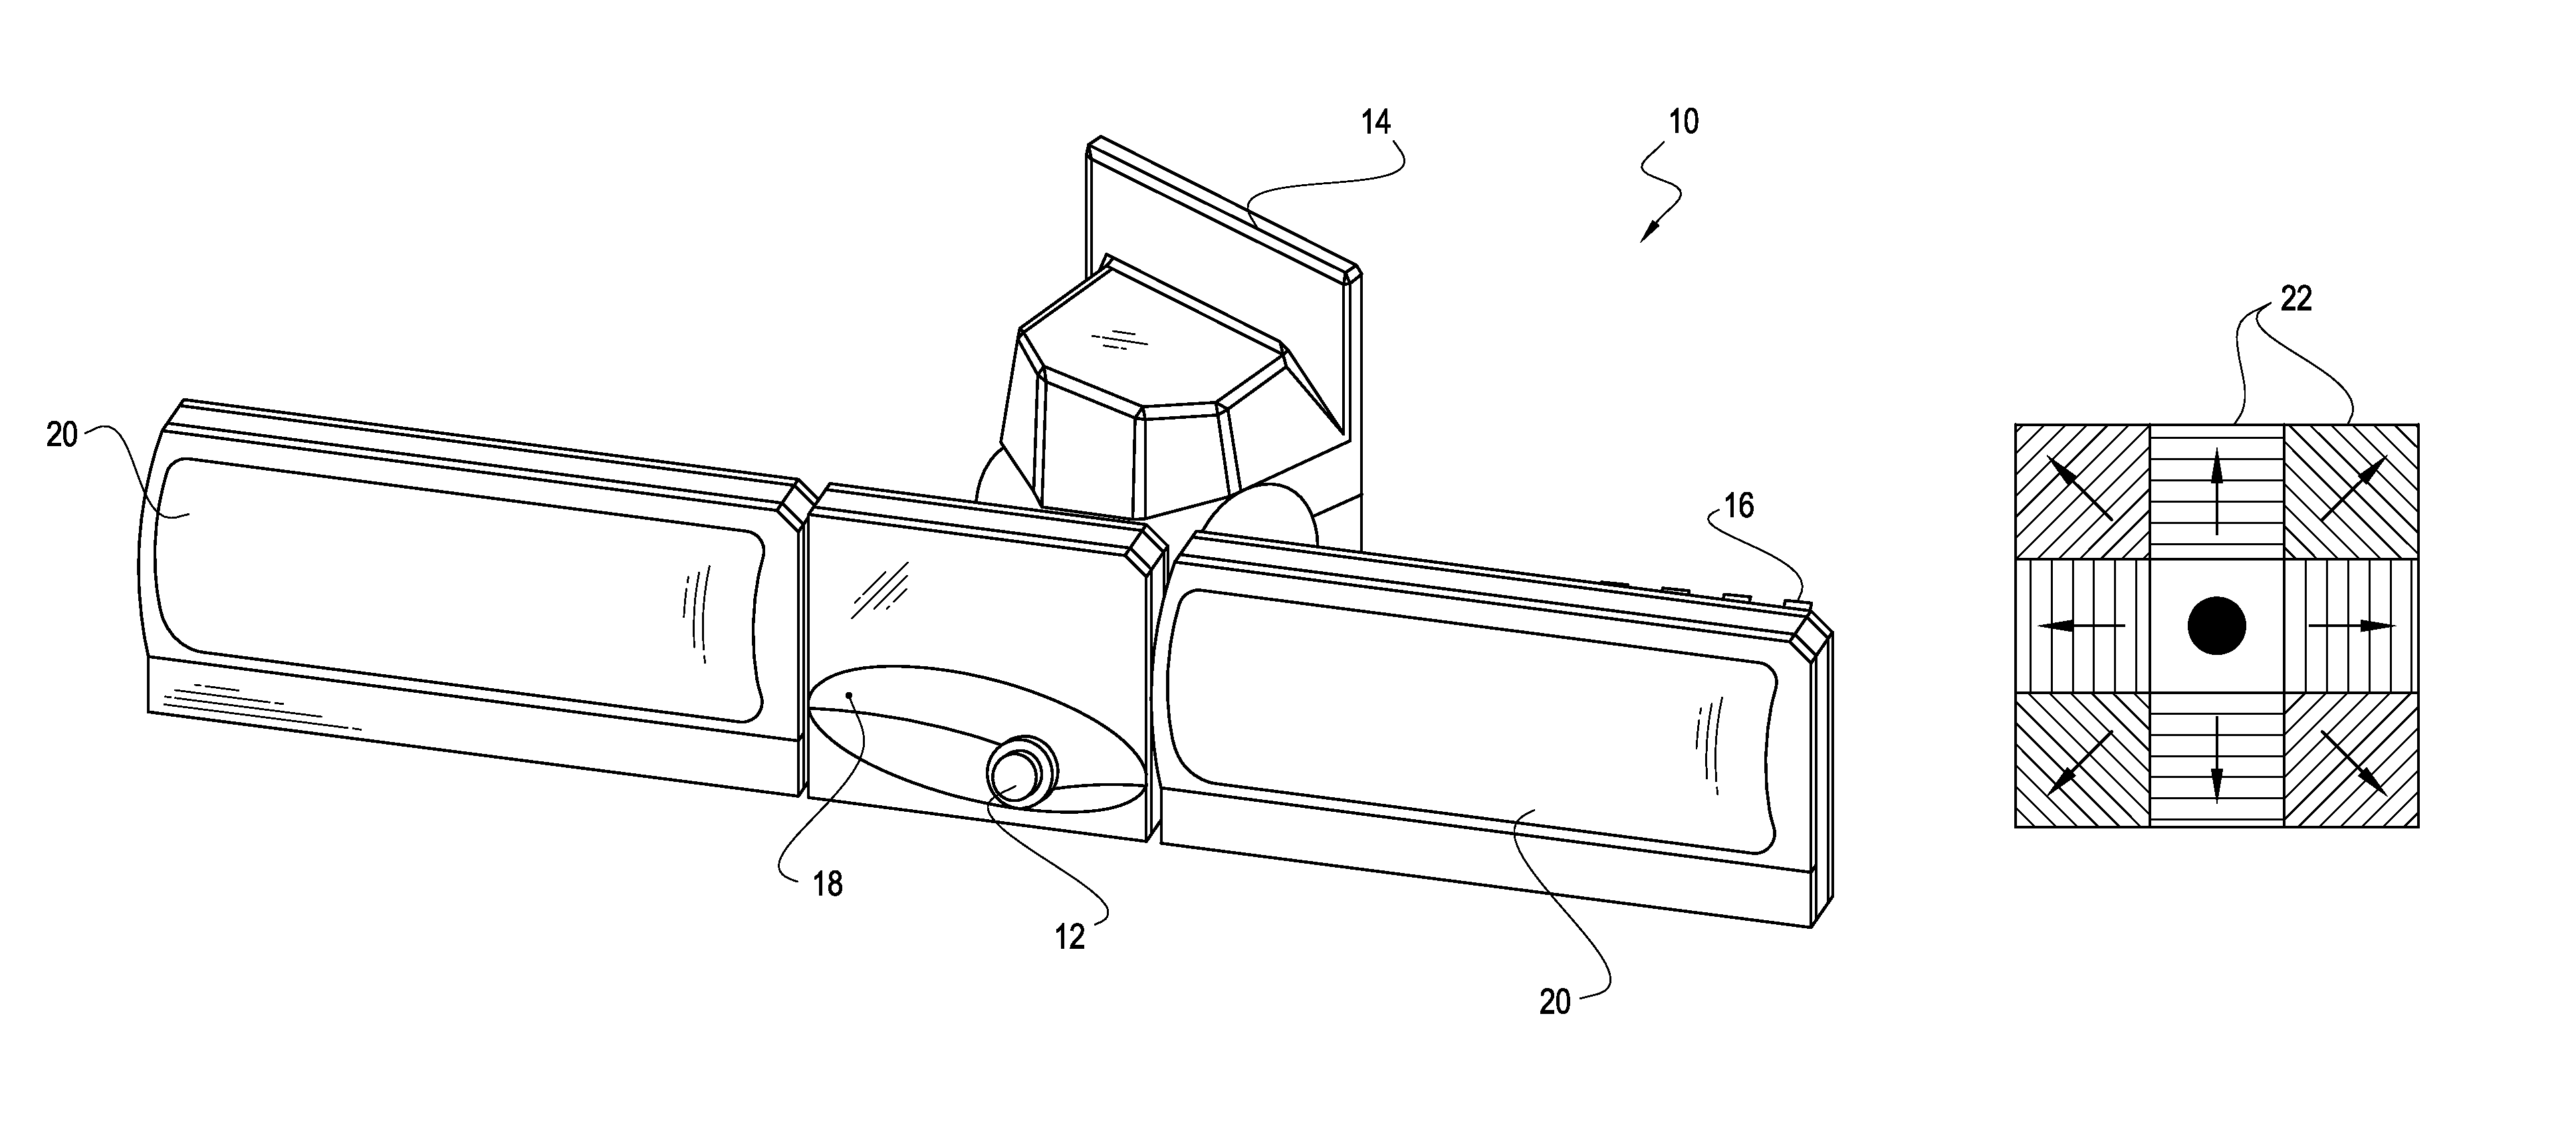 Self-calibrating multi-directional security luminaire and associated methods